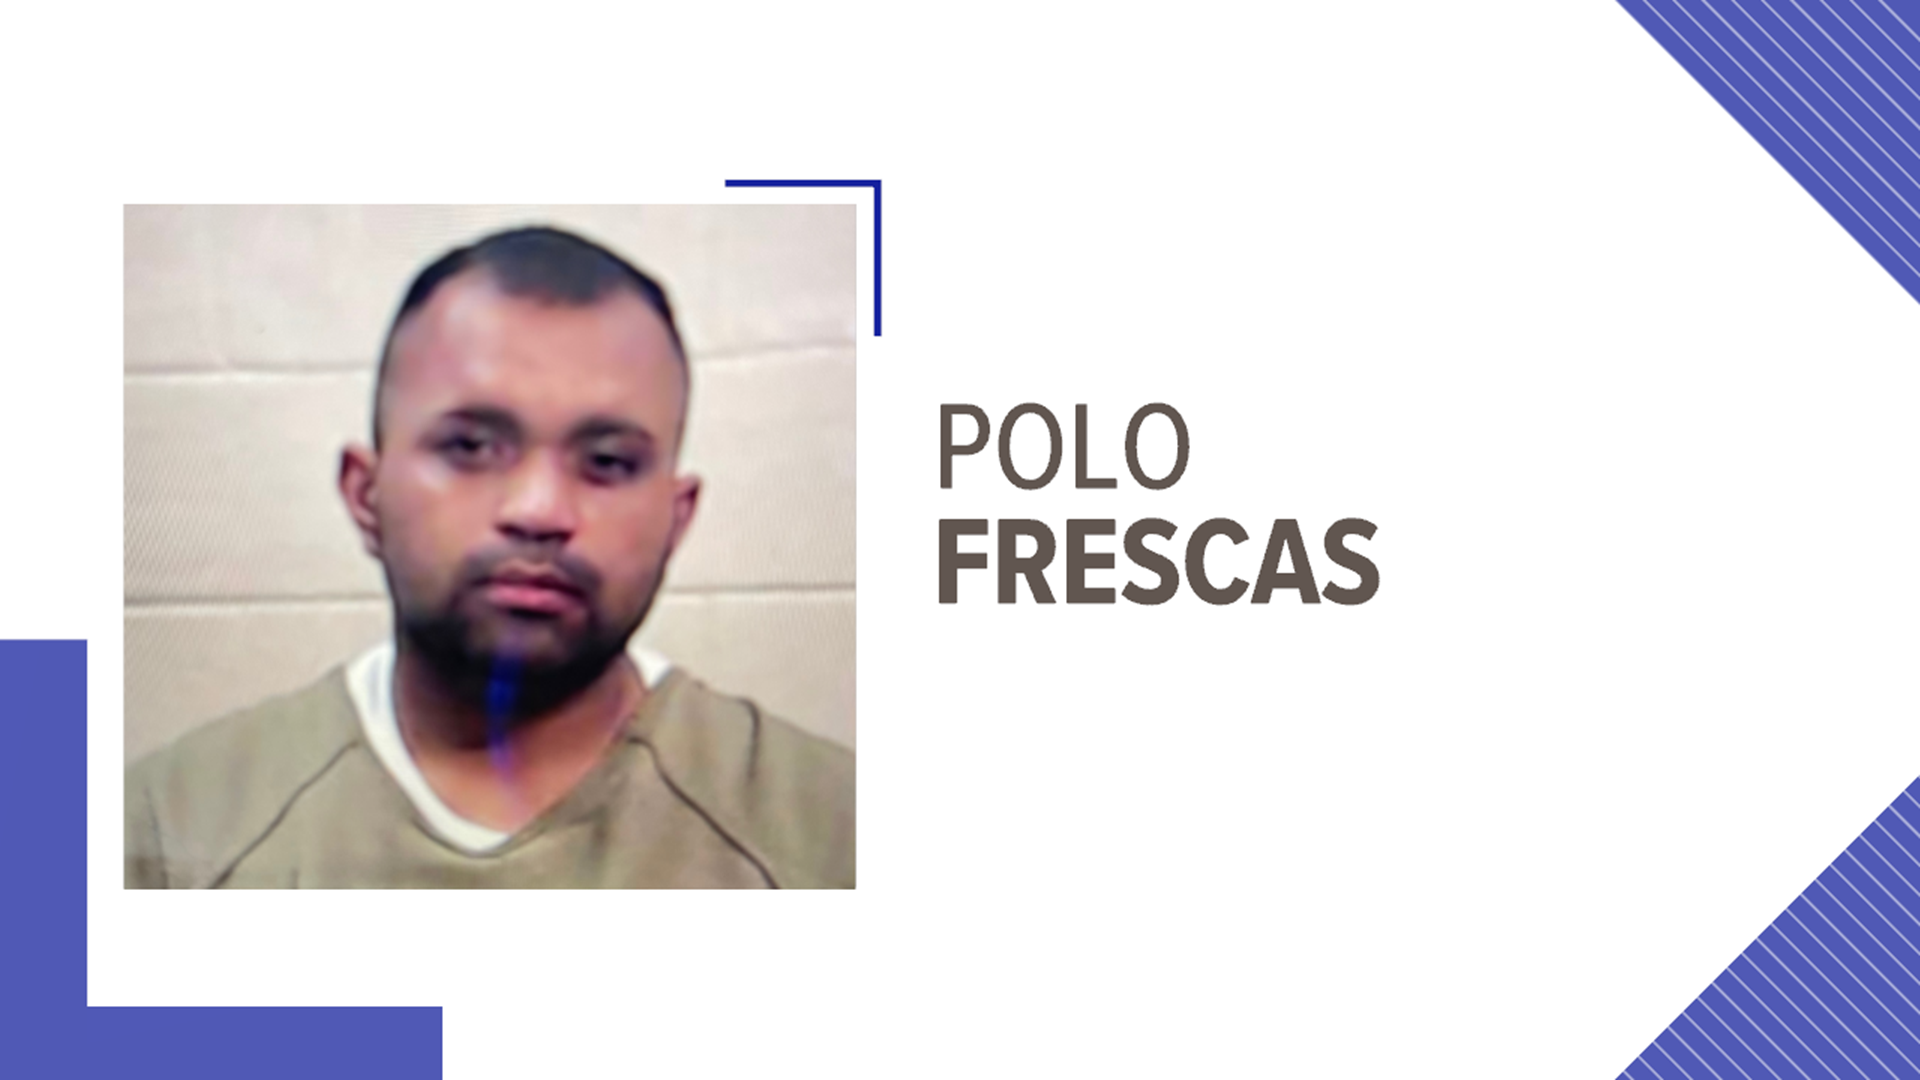 Polo Frescas has been an employee of the Odessa Police Department for seven years and held the rank of Sergeant.